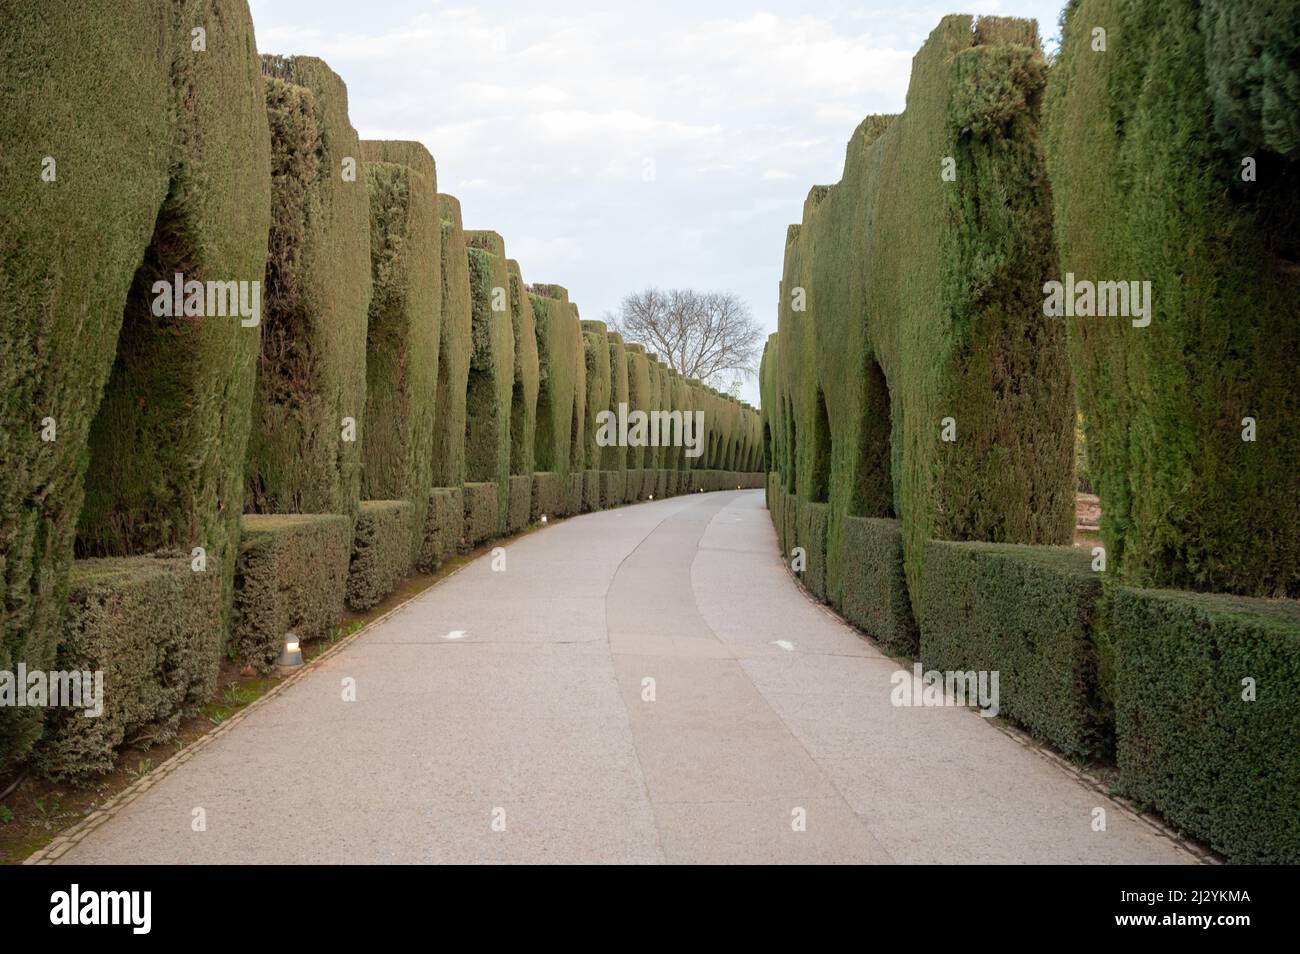 Mediterranean garden design with arches made from trimmed thuja coniferus trees Stock Photo